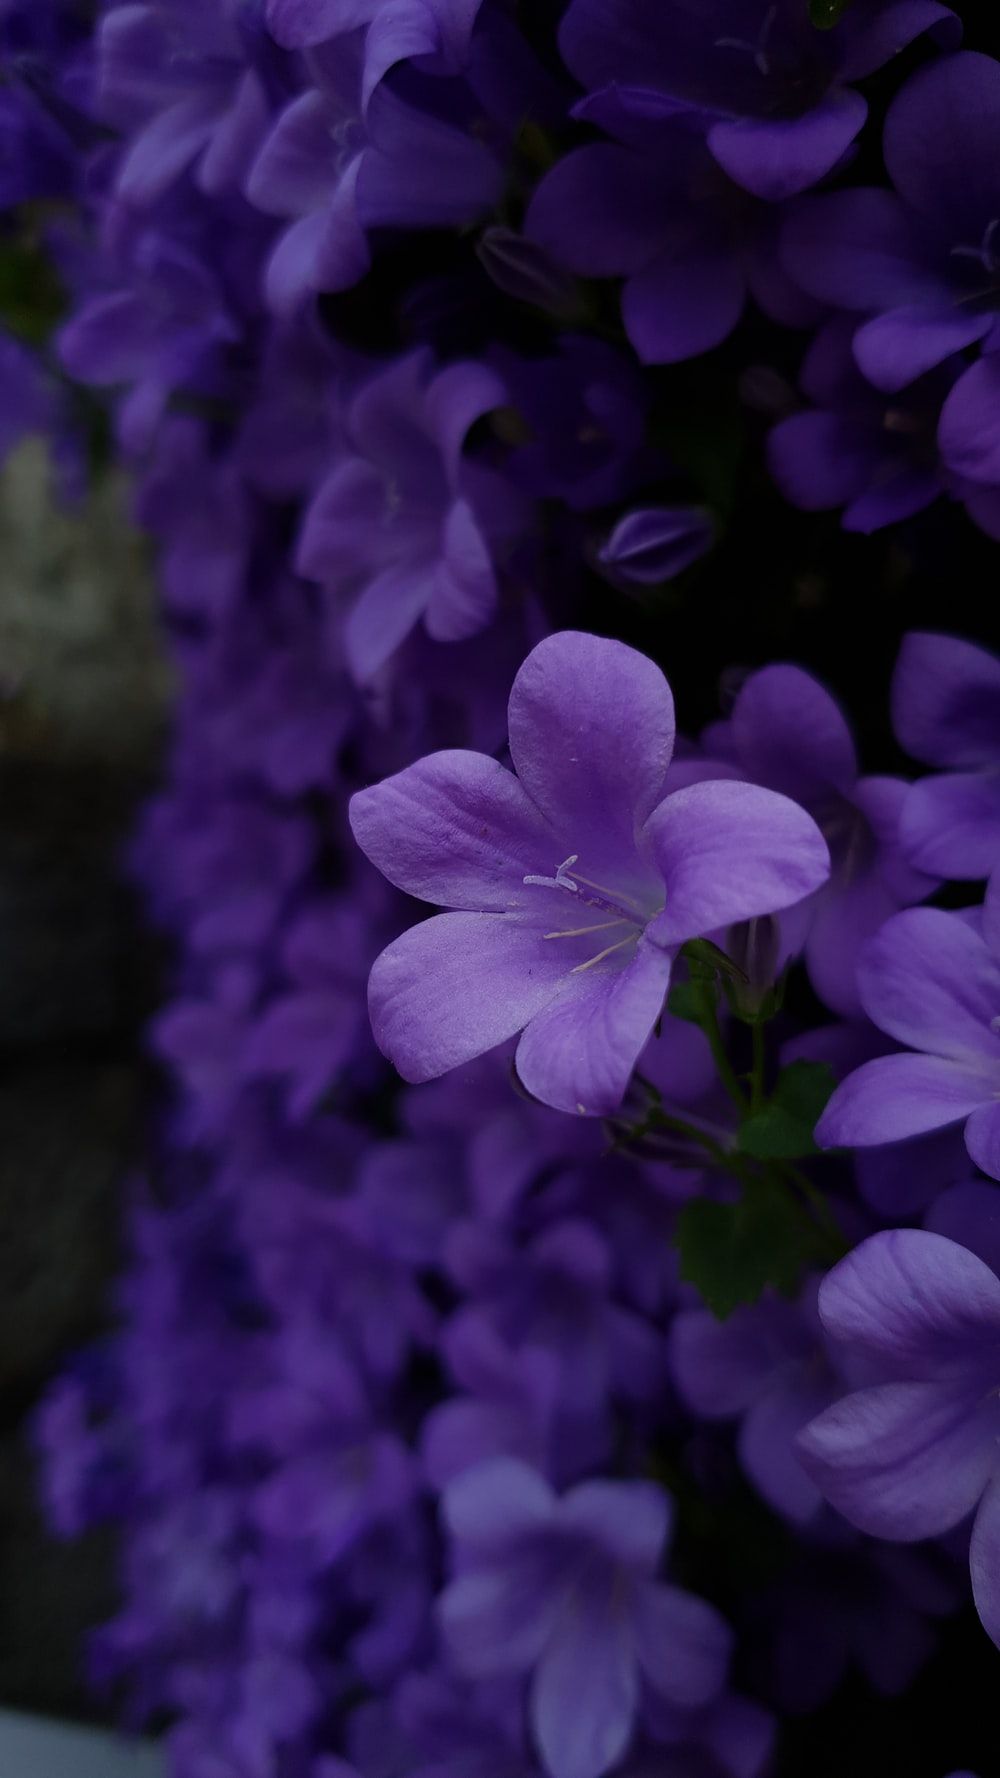 Violet Picture. Download Free Image